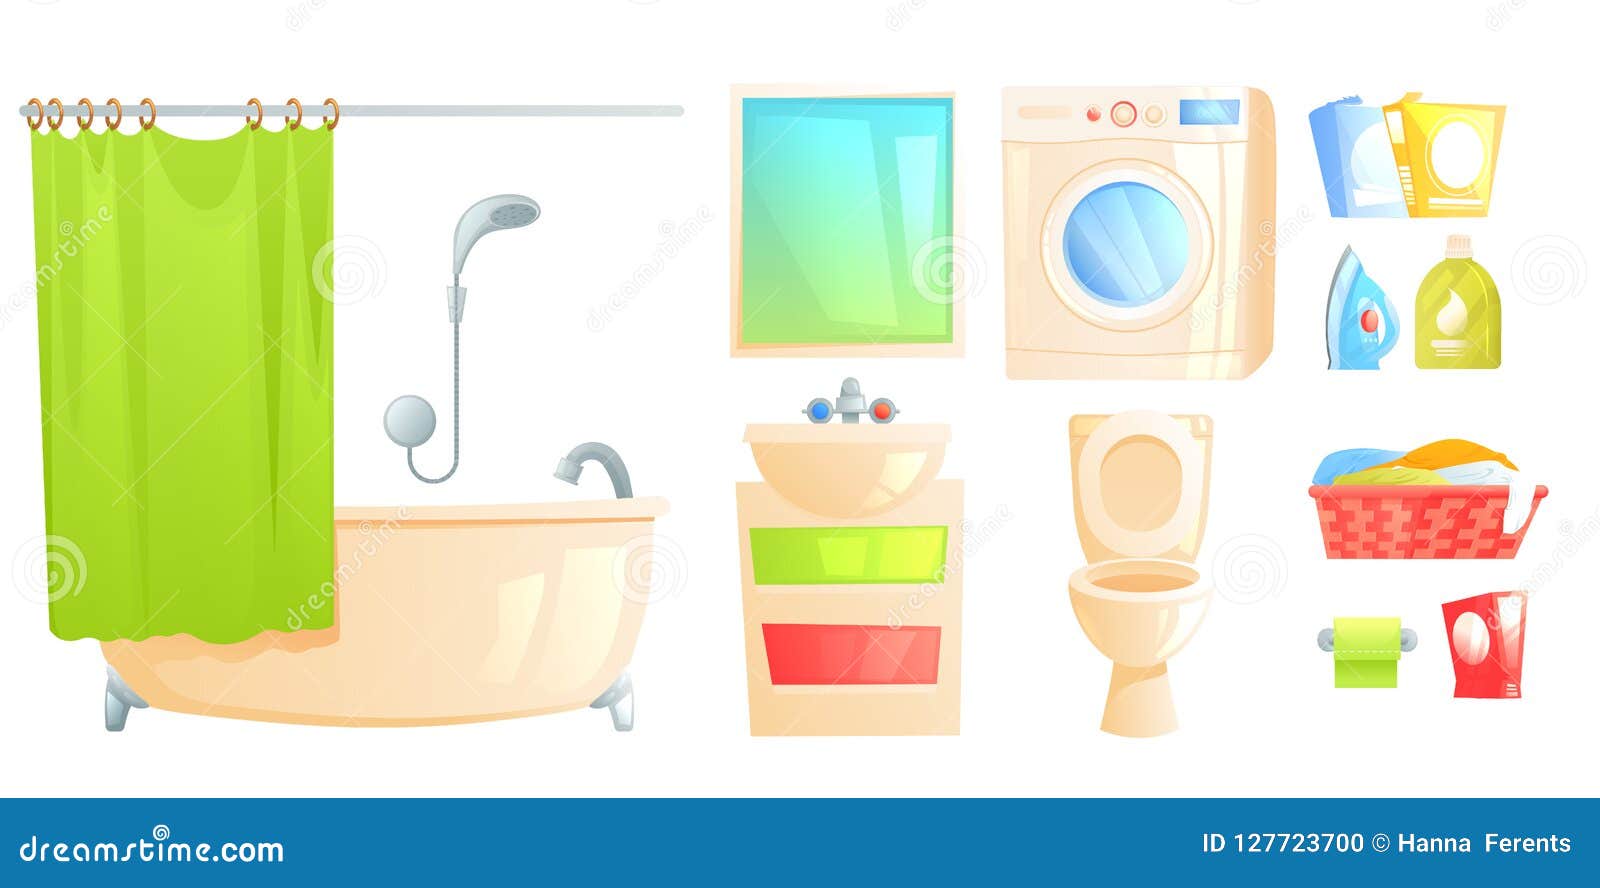 Bathroom furniture and equipment isolated objects bath and toilet